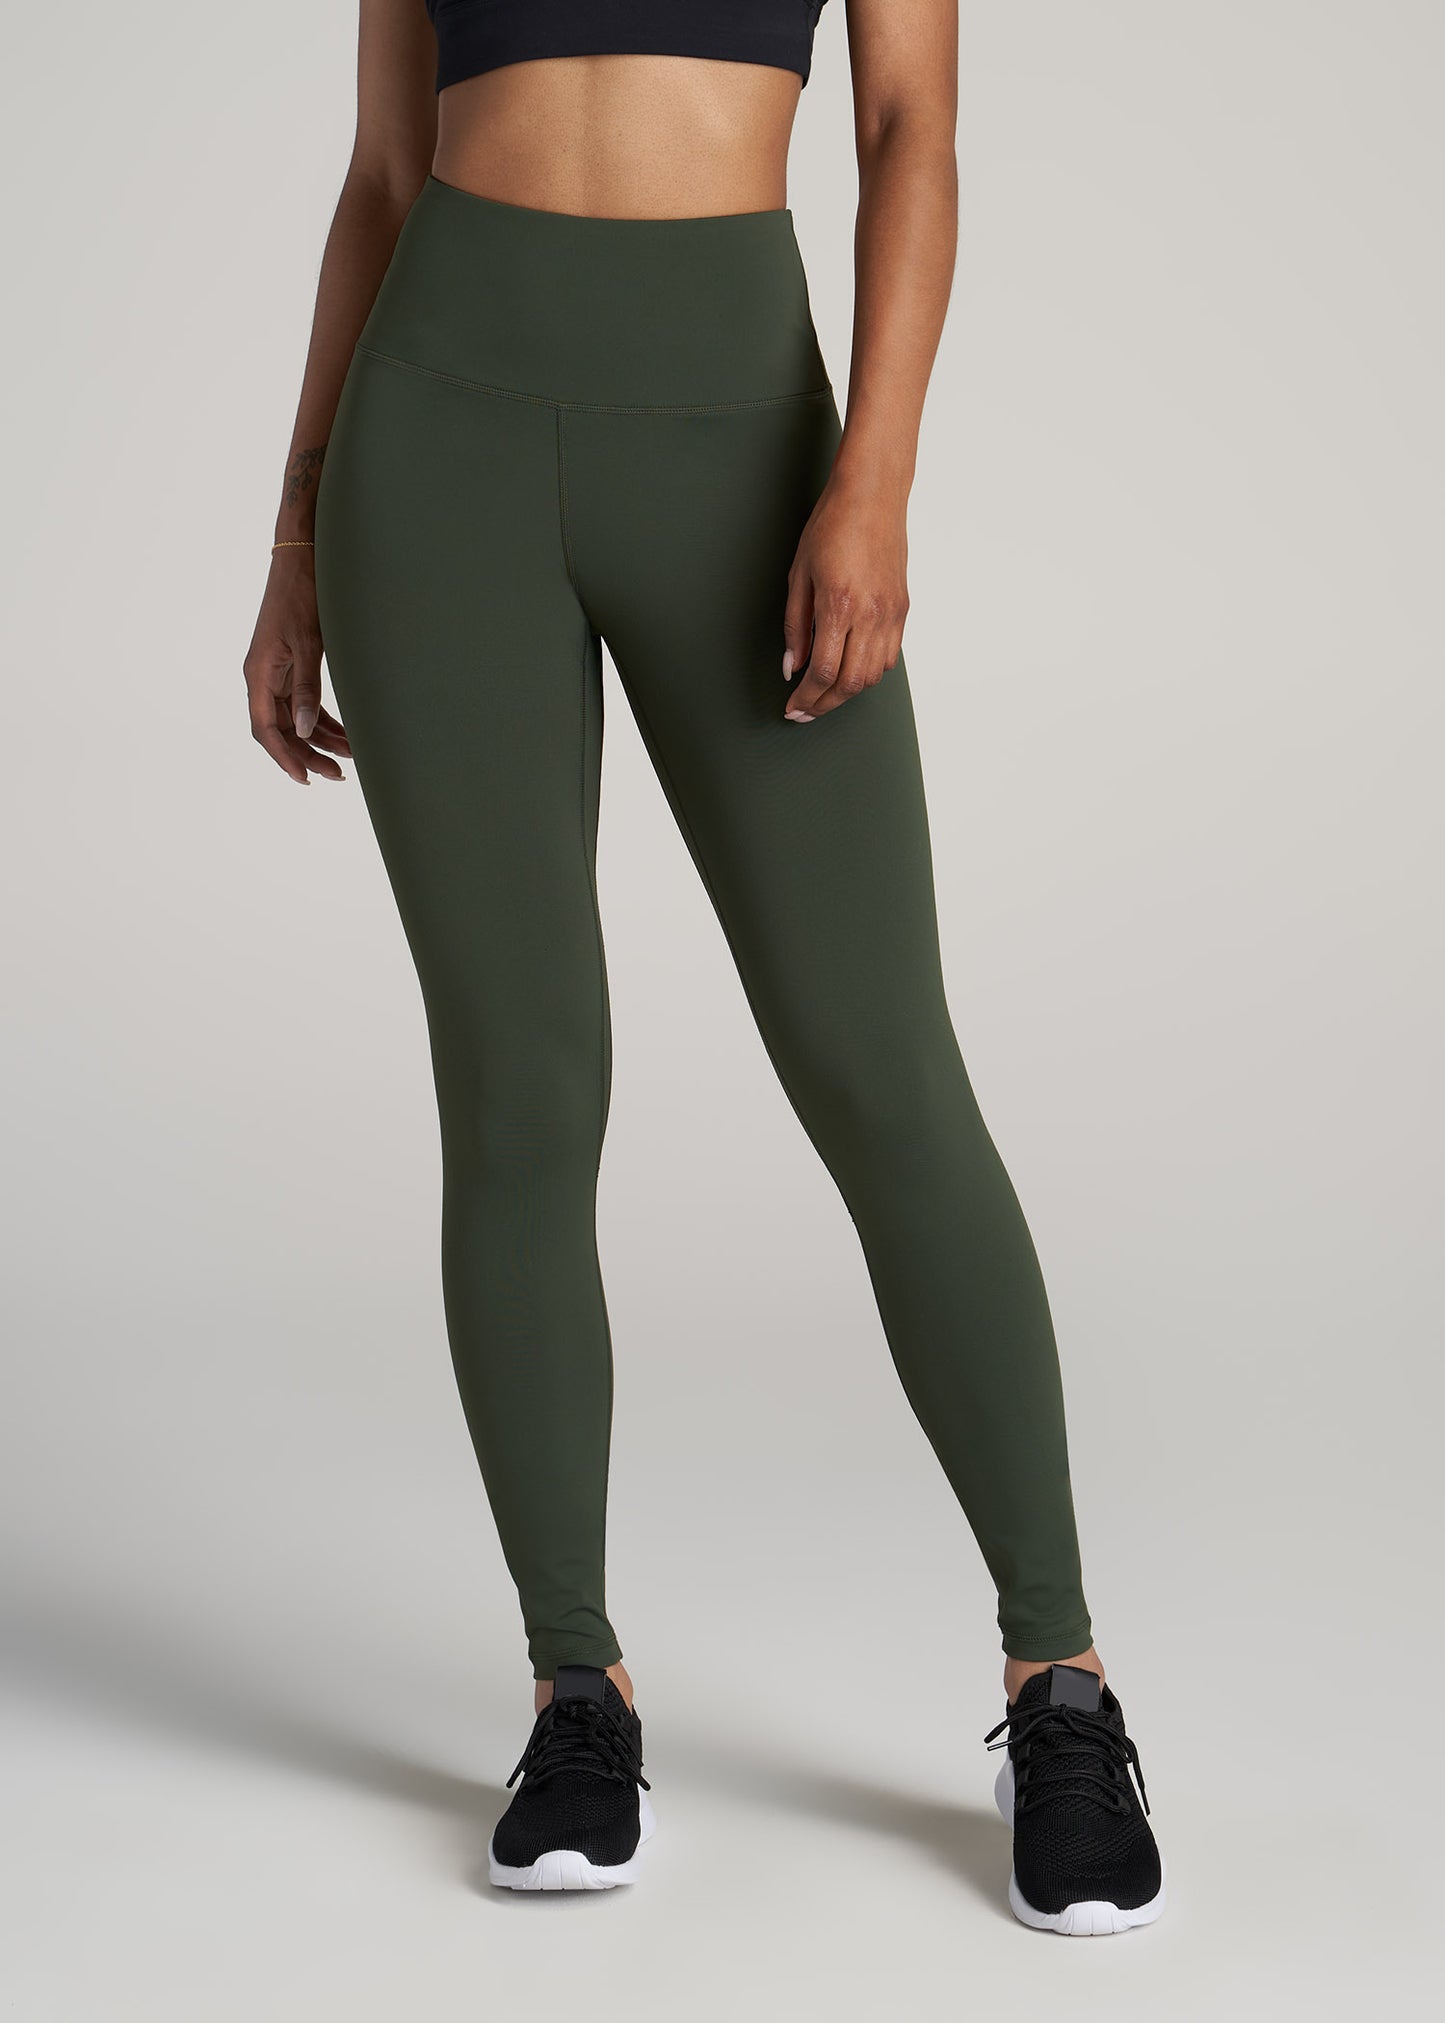  HeyNuts Extra Long High Waisted Leggings For Tall